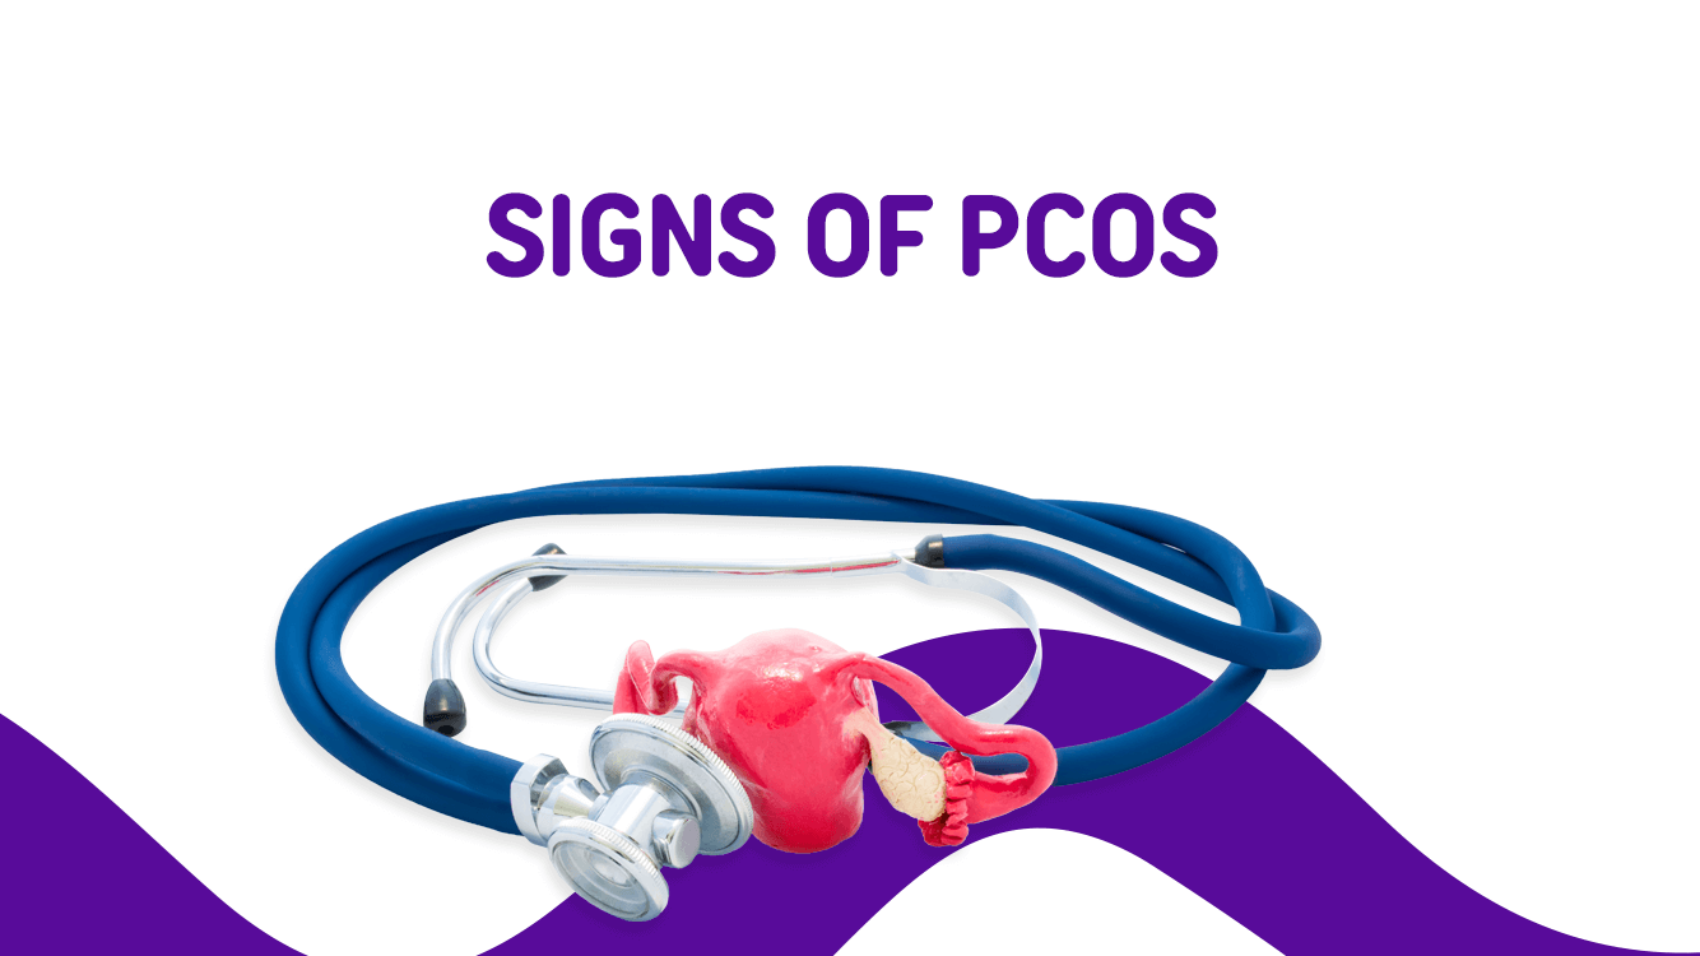 Signs-of-PCOS-Banker-IVF-01 (1)